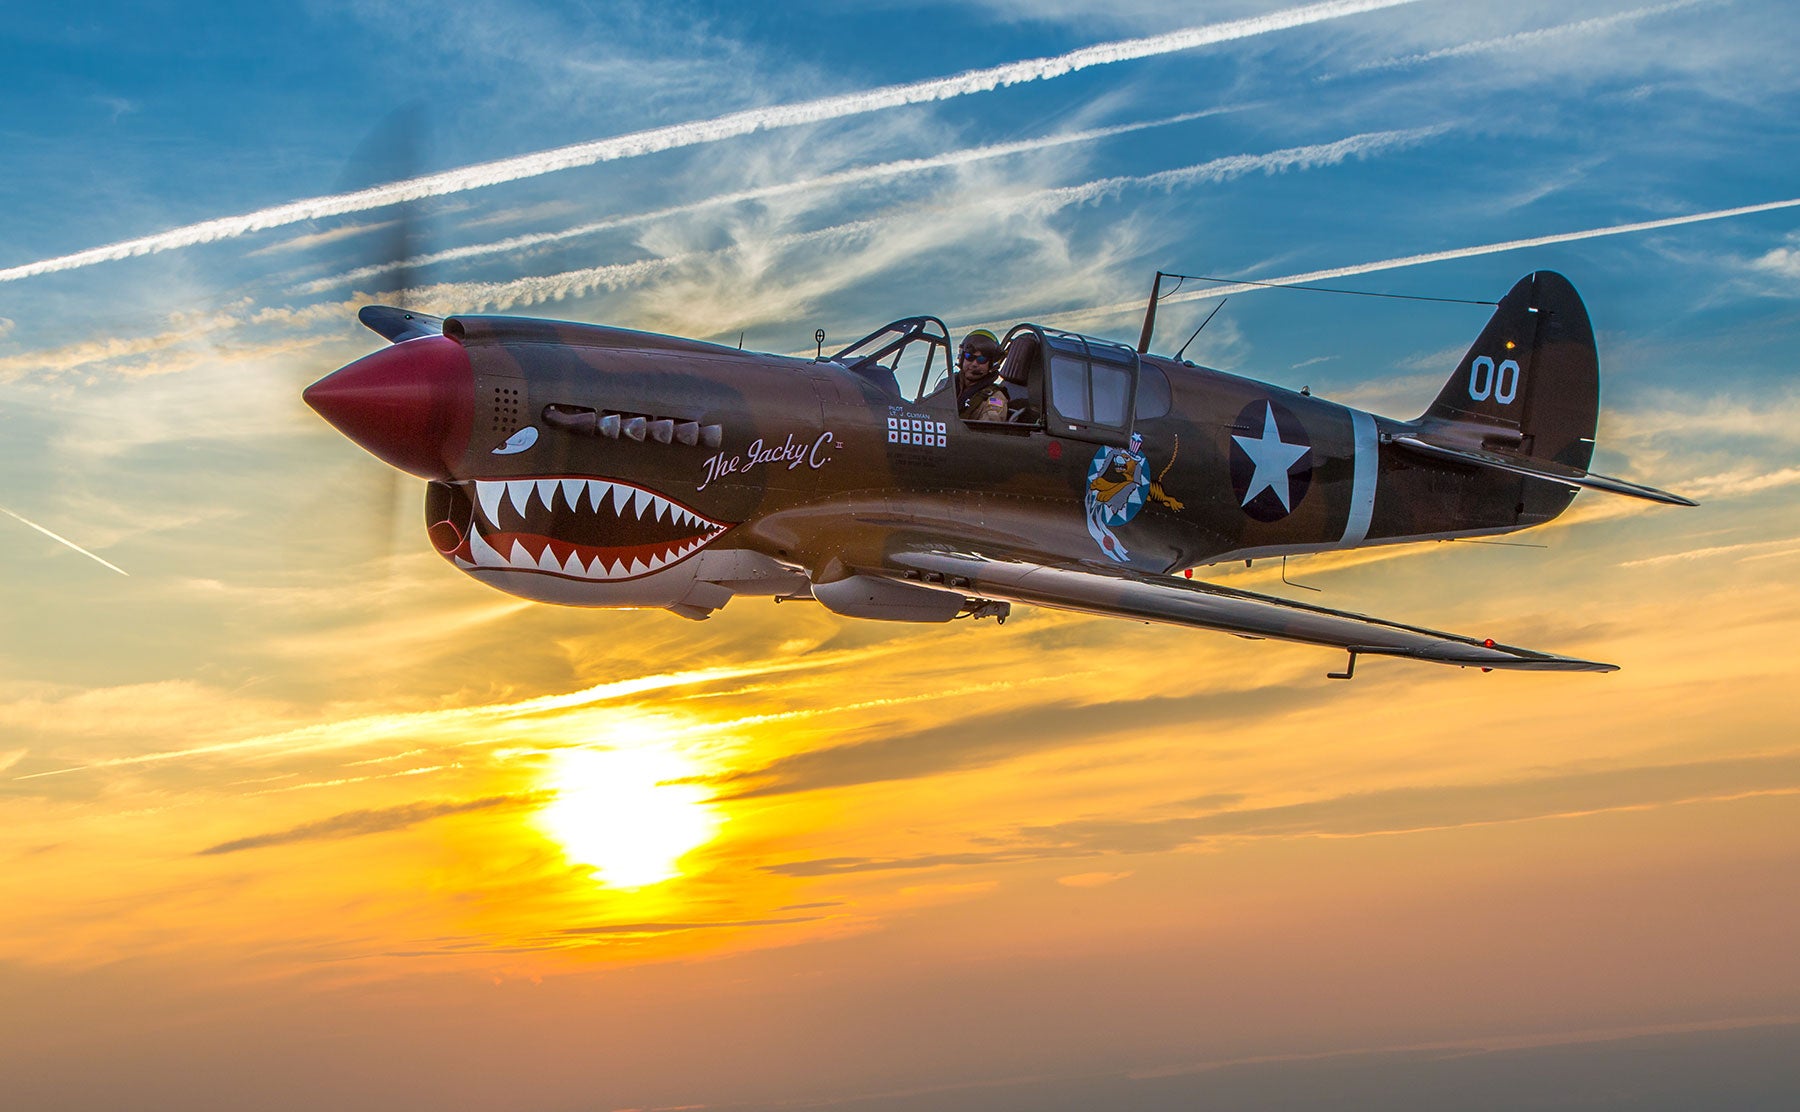 The American Airpower Museum's P-40 will be at SUN 'n FUN in Florida